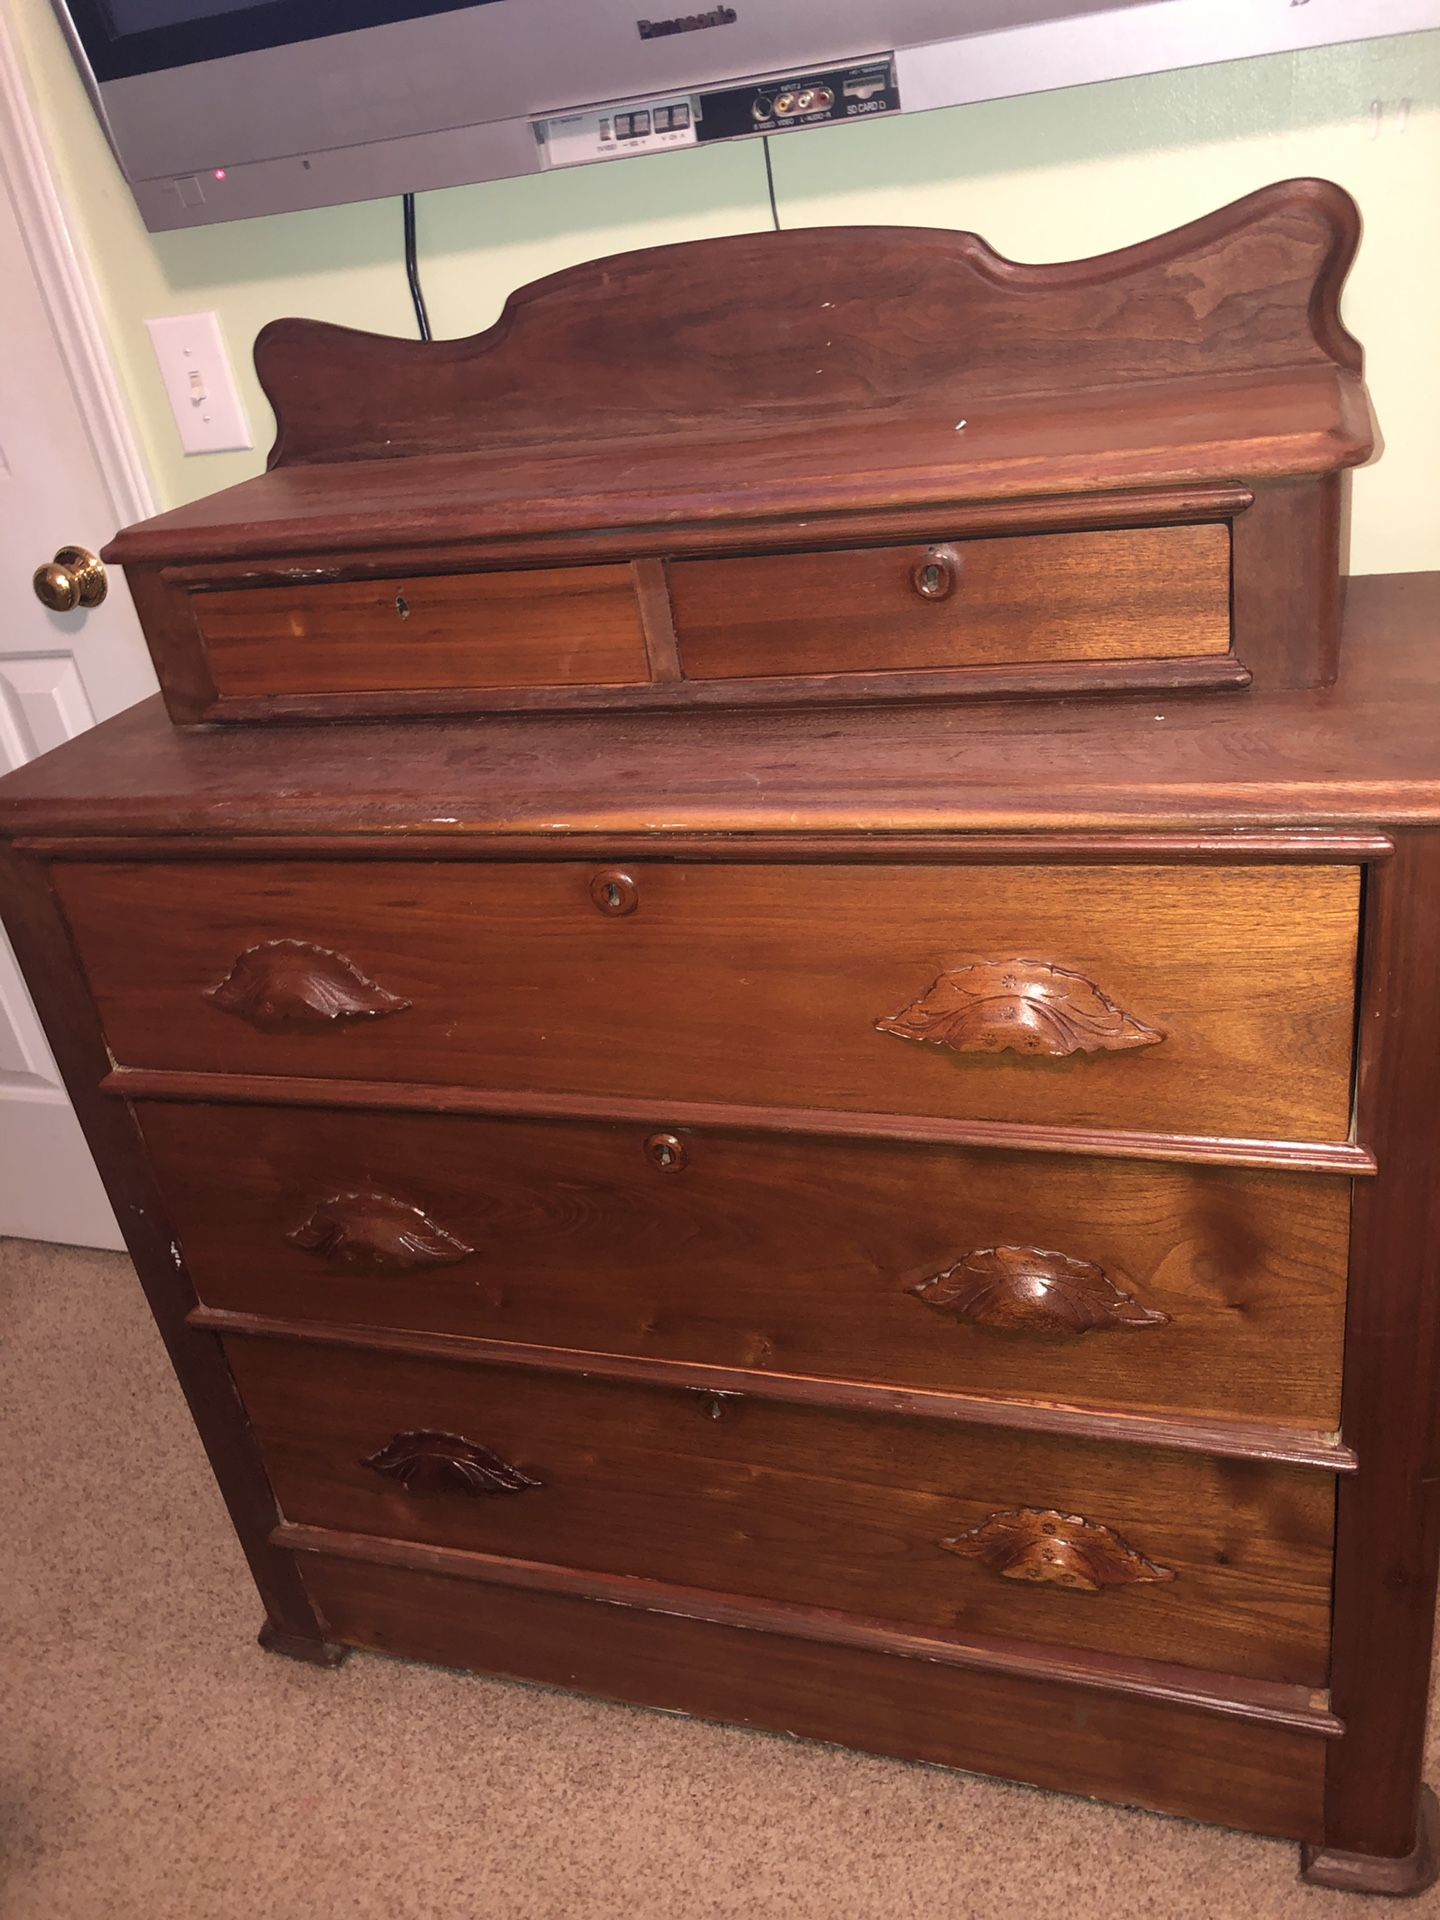 Antique wooden dresser all drawers have locks but no key